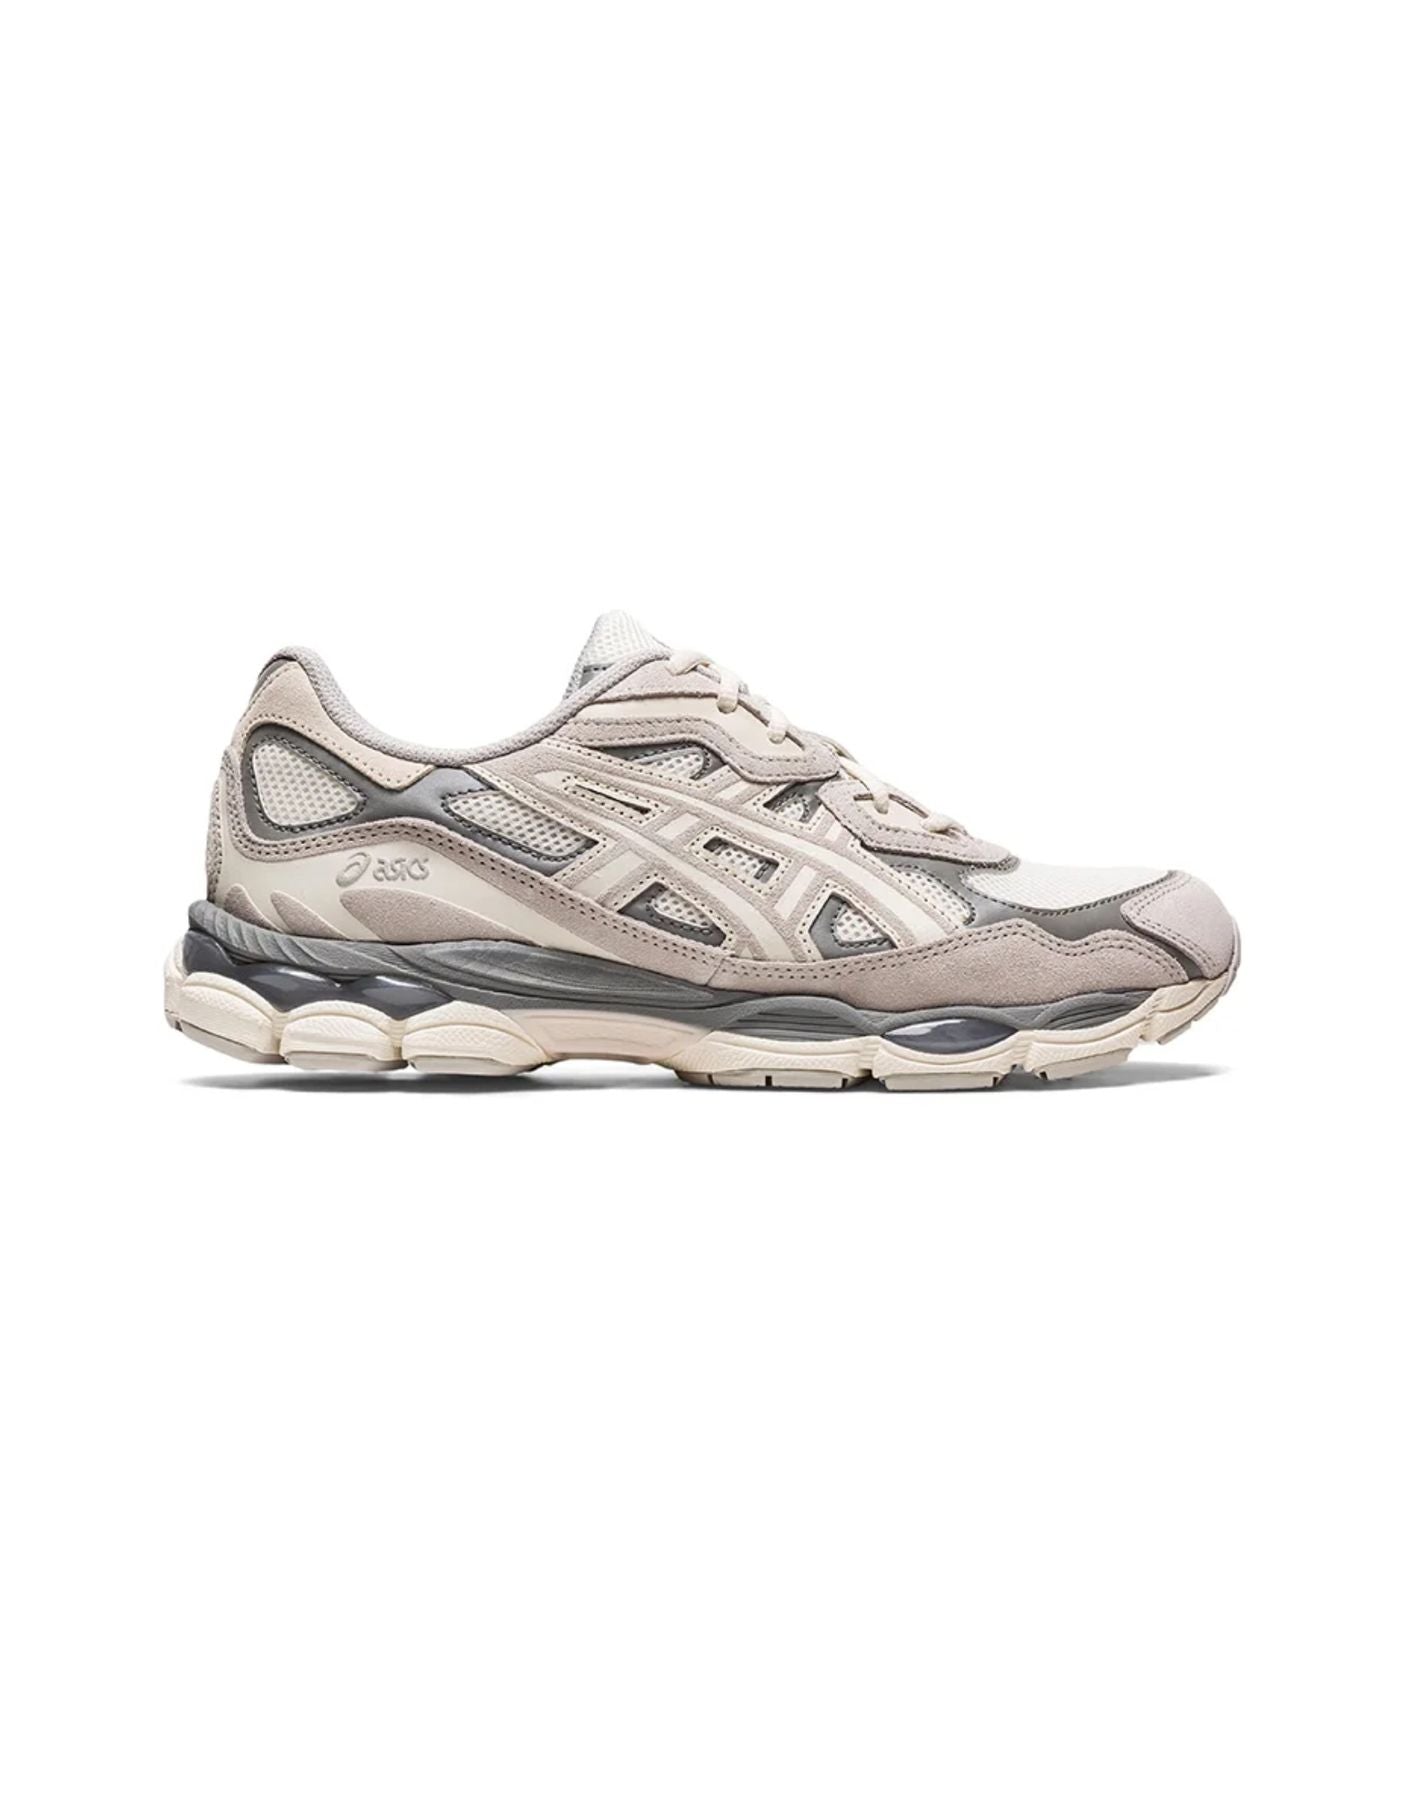 Chaussures pour l'homme Gel-NYC crème / Oyster Gray M ASICS